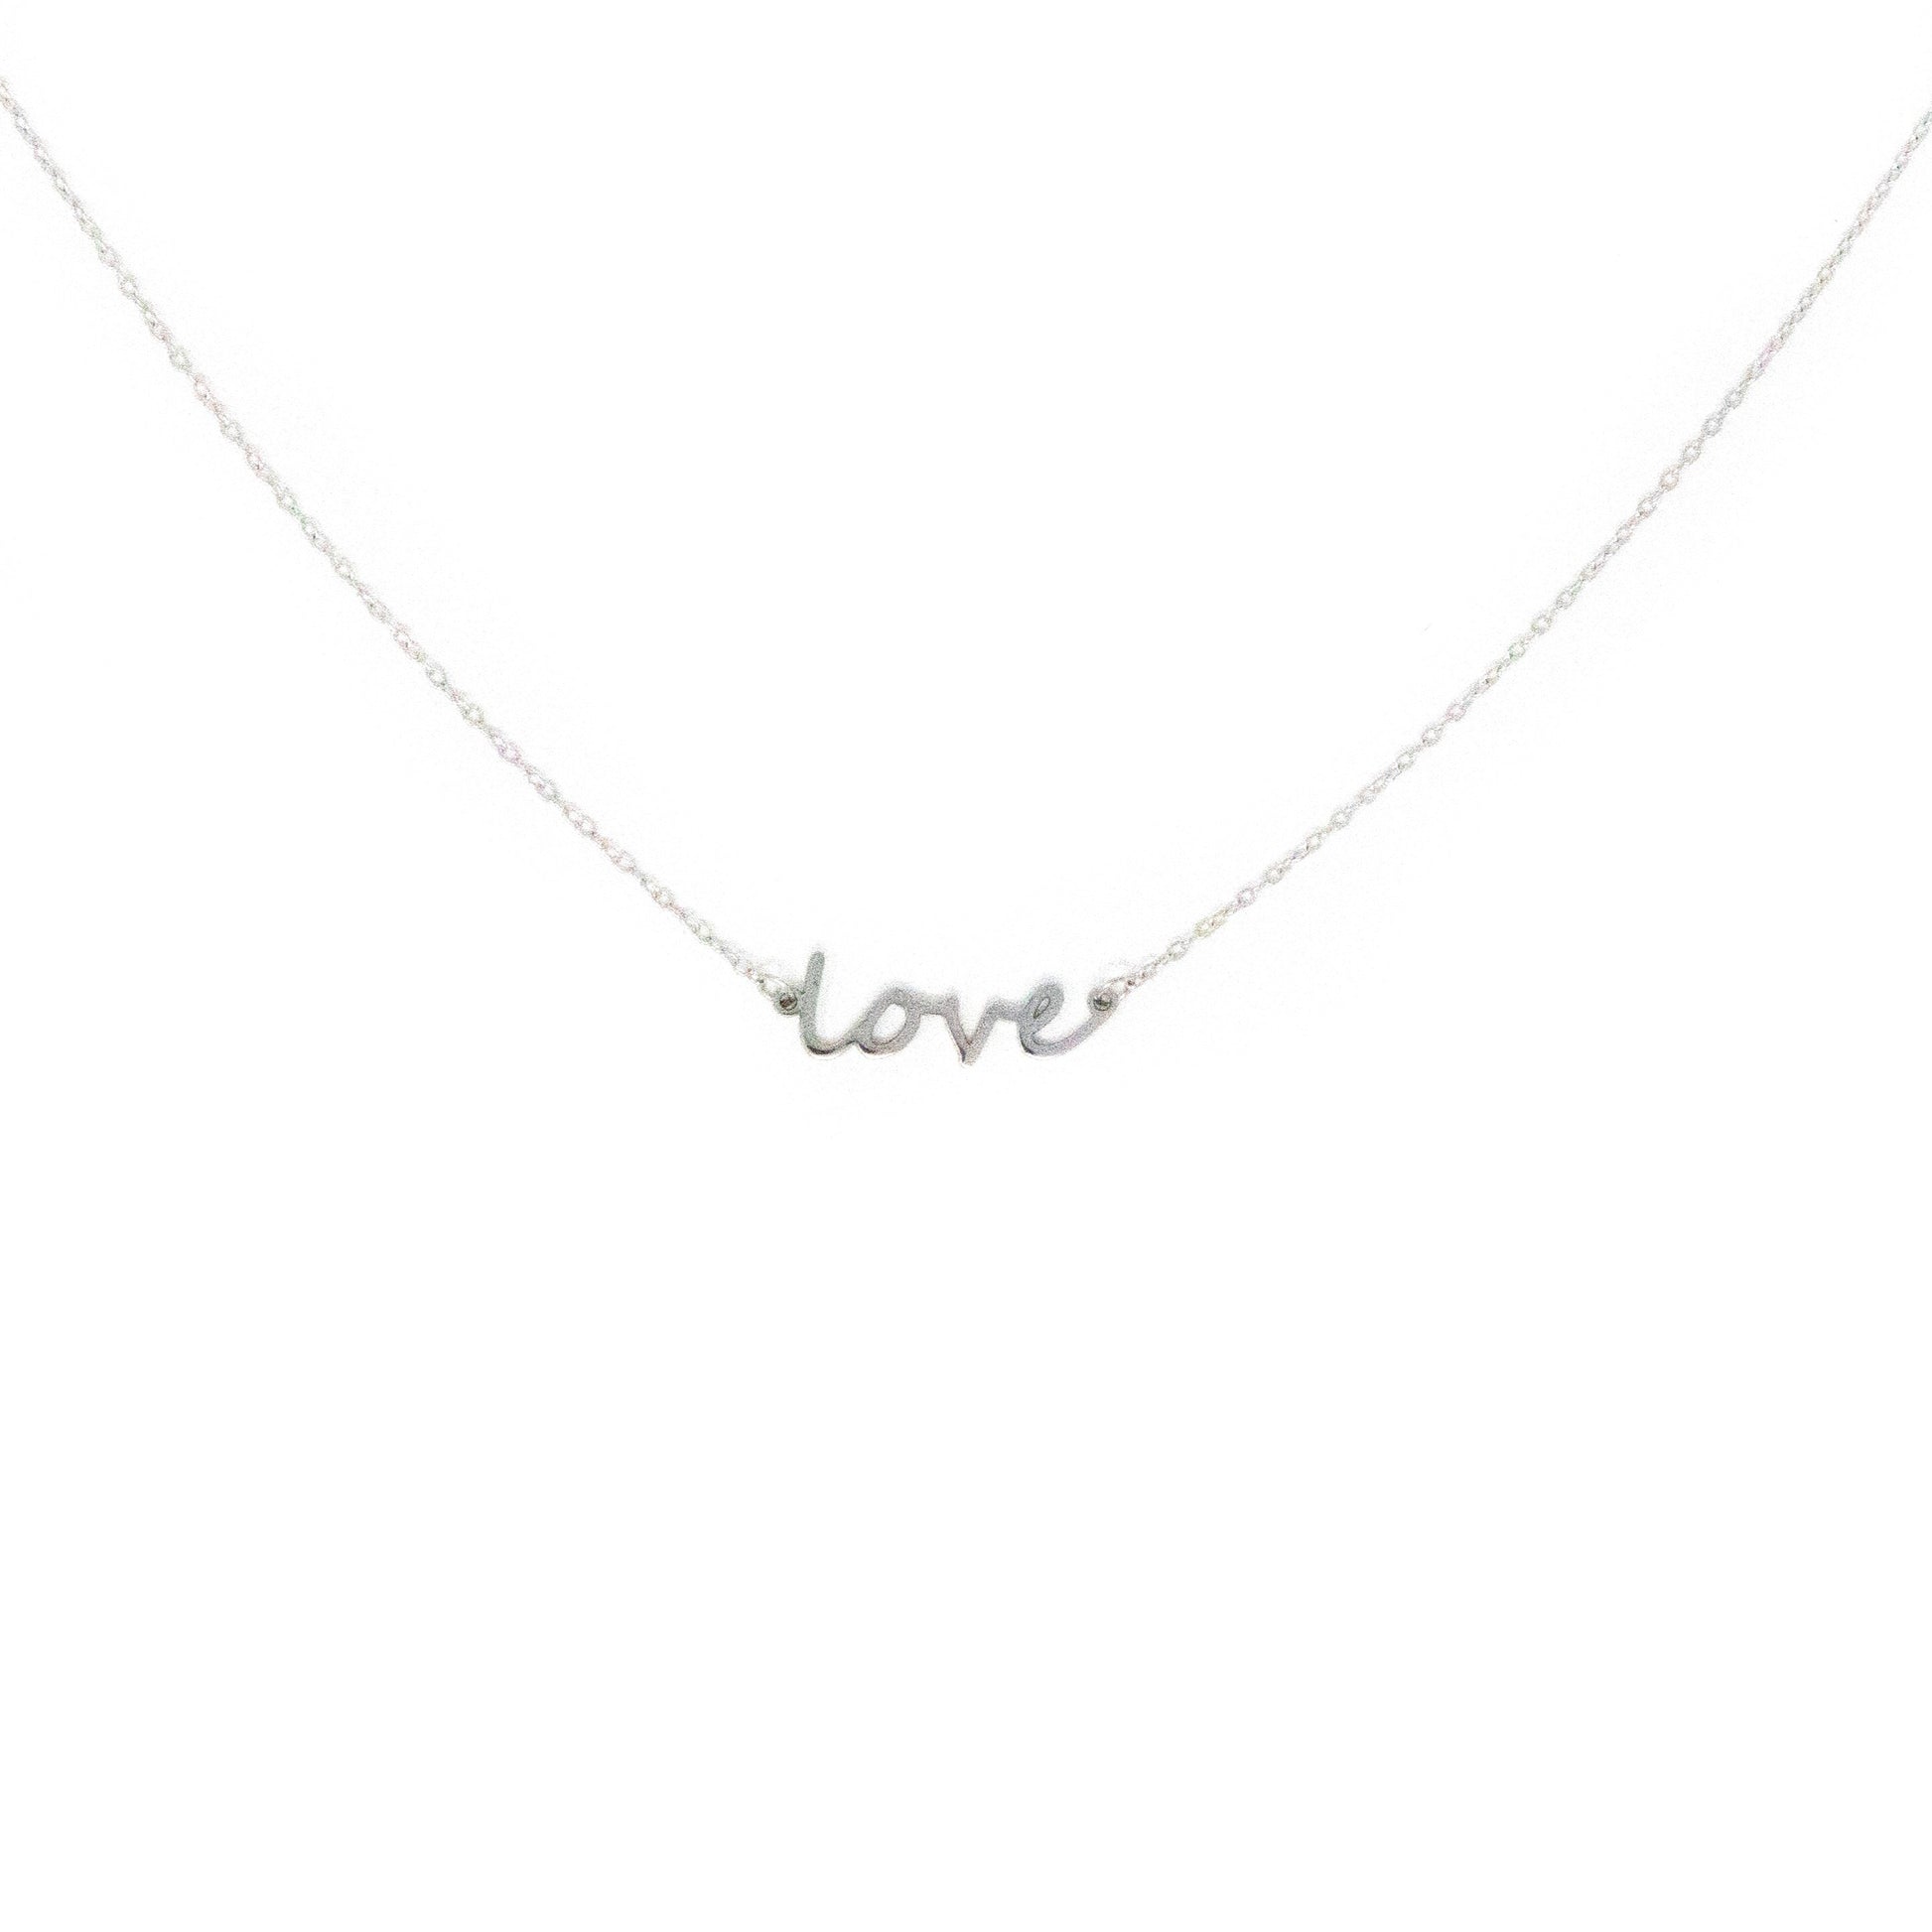 Love Dainty Necklace necklace The Sis Kiss Silver